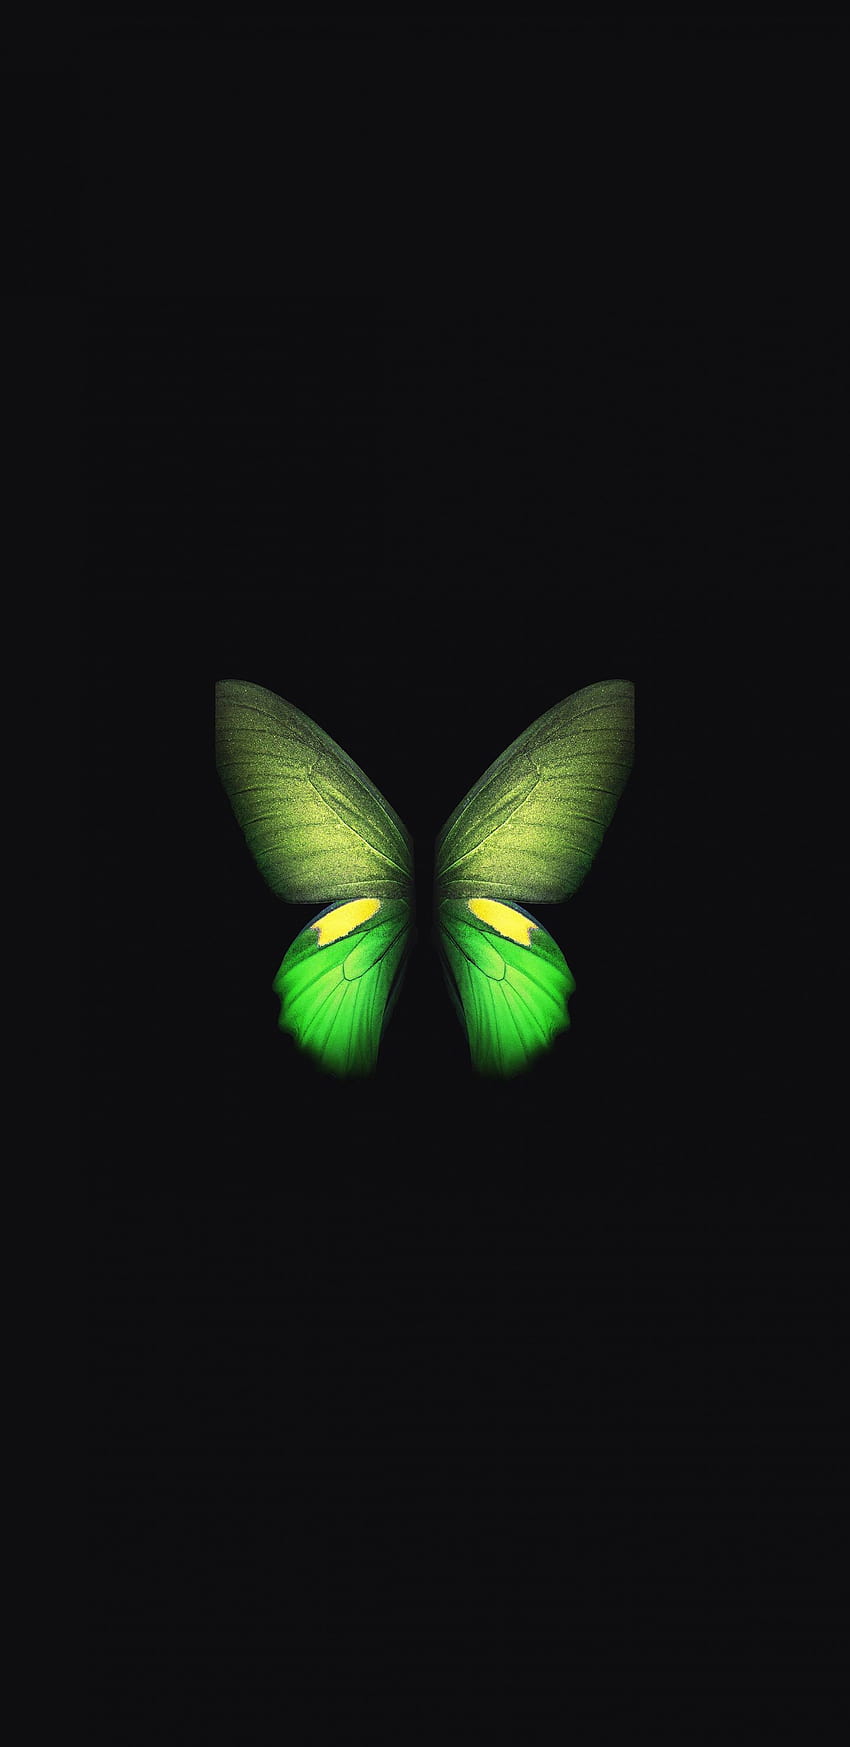 Samsung Galaxy Fold Butterfly green [1440x2960] for your , モバイル & タブレット, 銀河の蝶 HD電話の壁紙